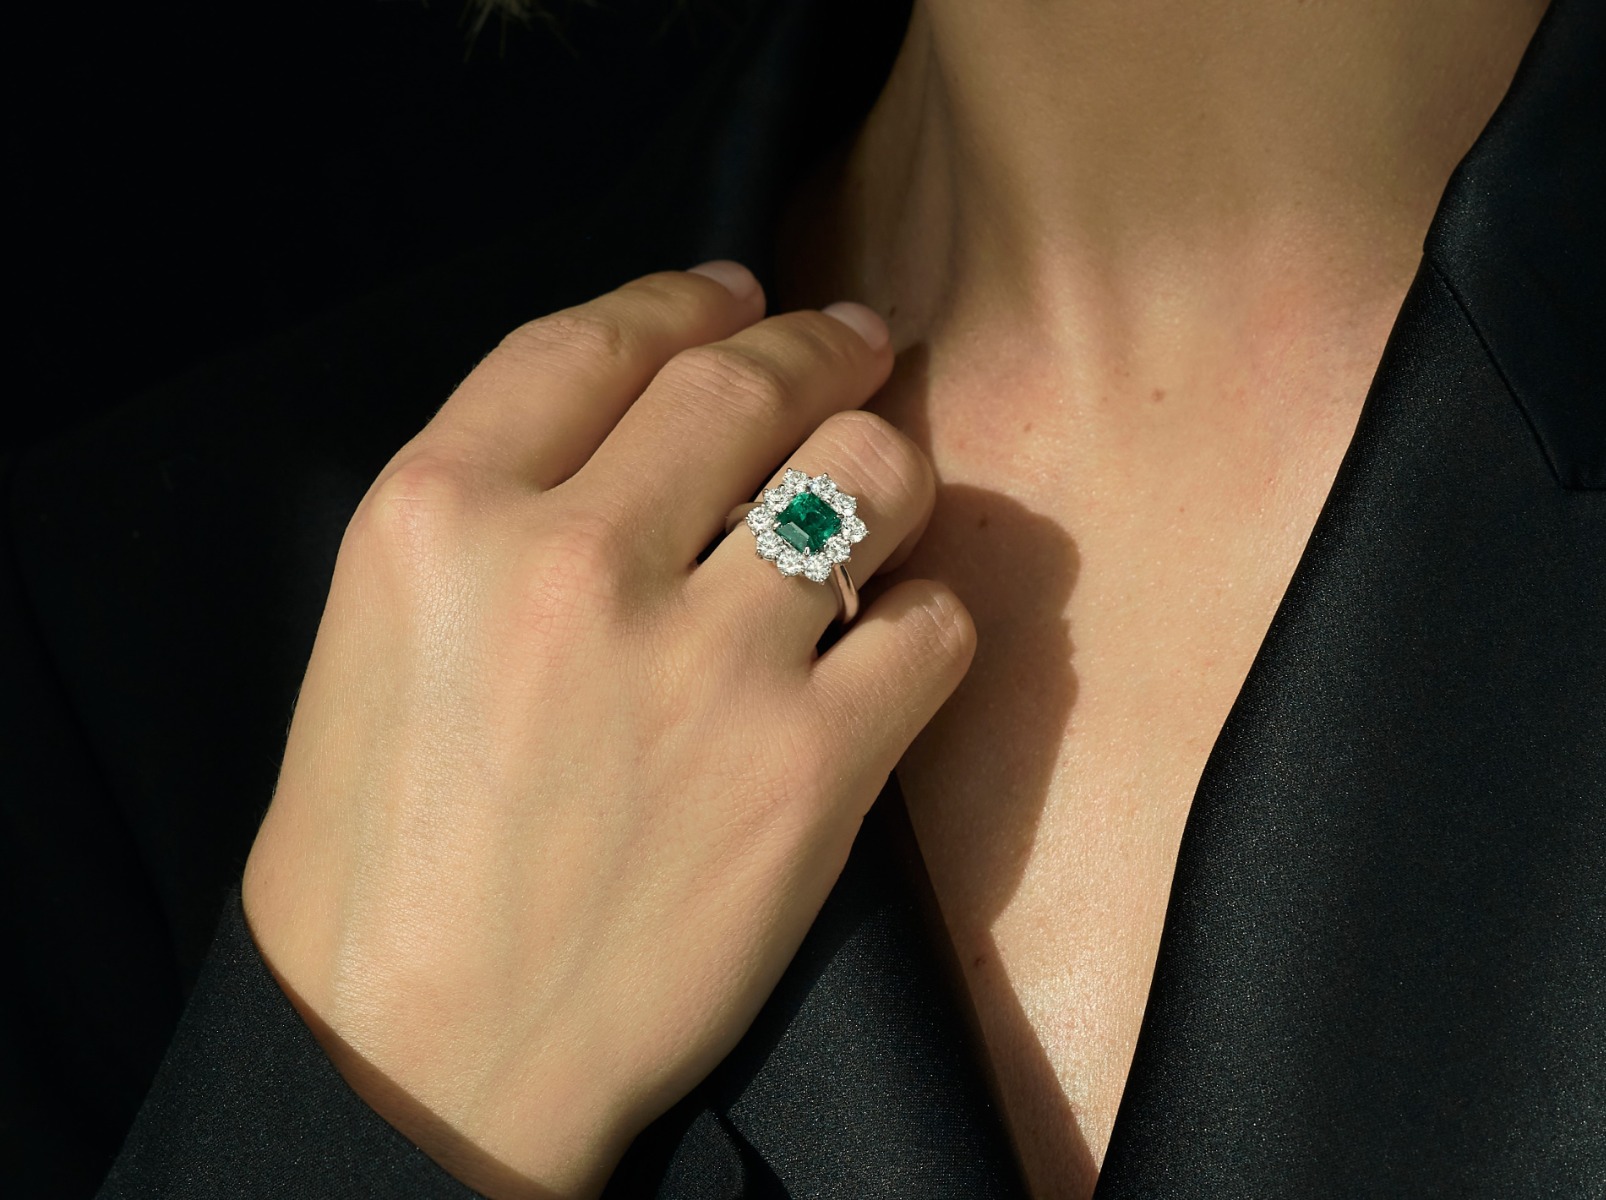 Two Emerald rings worn on a hand